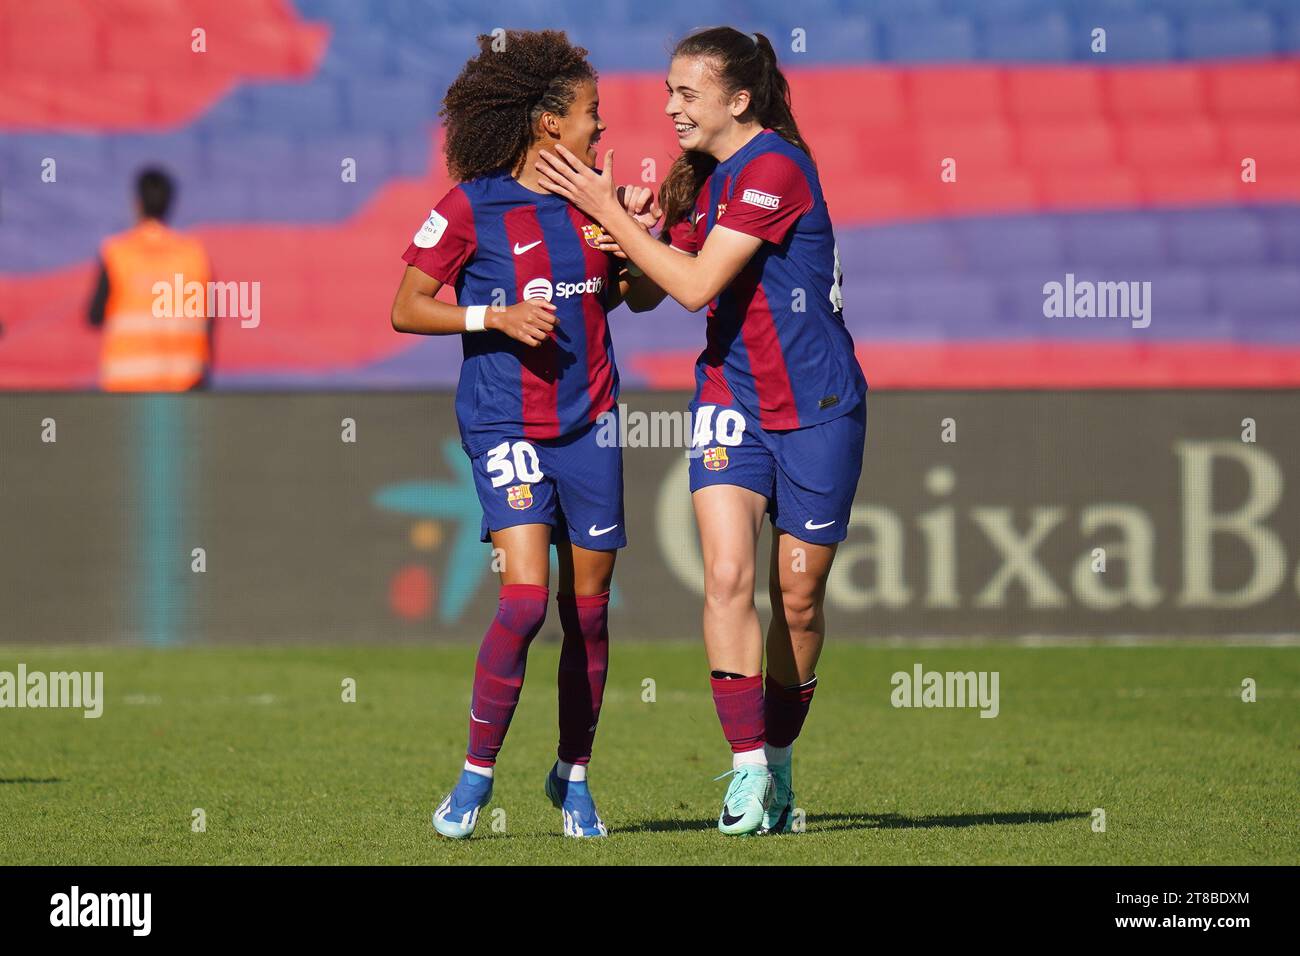 Barcelona, Spain. 19th Nov, 2023. Vicky Lopez and Lucia Corrales of FC Barcelona celebrates after scoring goal during the Liga F match between FC Barcelona and Real Madrid played at Luis Companys Stadium on November 19, 2023 in Barcelona, Spain. (Photo by Carla Pazos/PRESSINPHOTO) Credit: PRESSINPHOTO SPORTS AGENCY/Alamy Live News Stock Photo